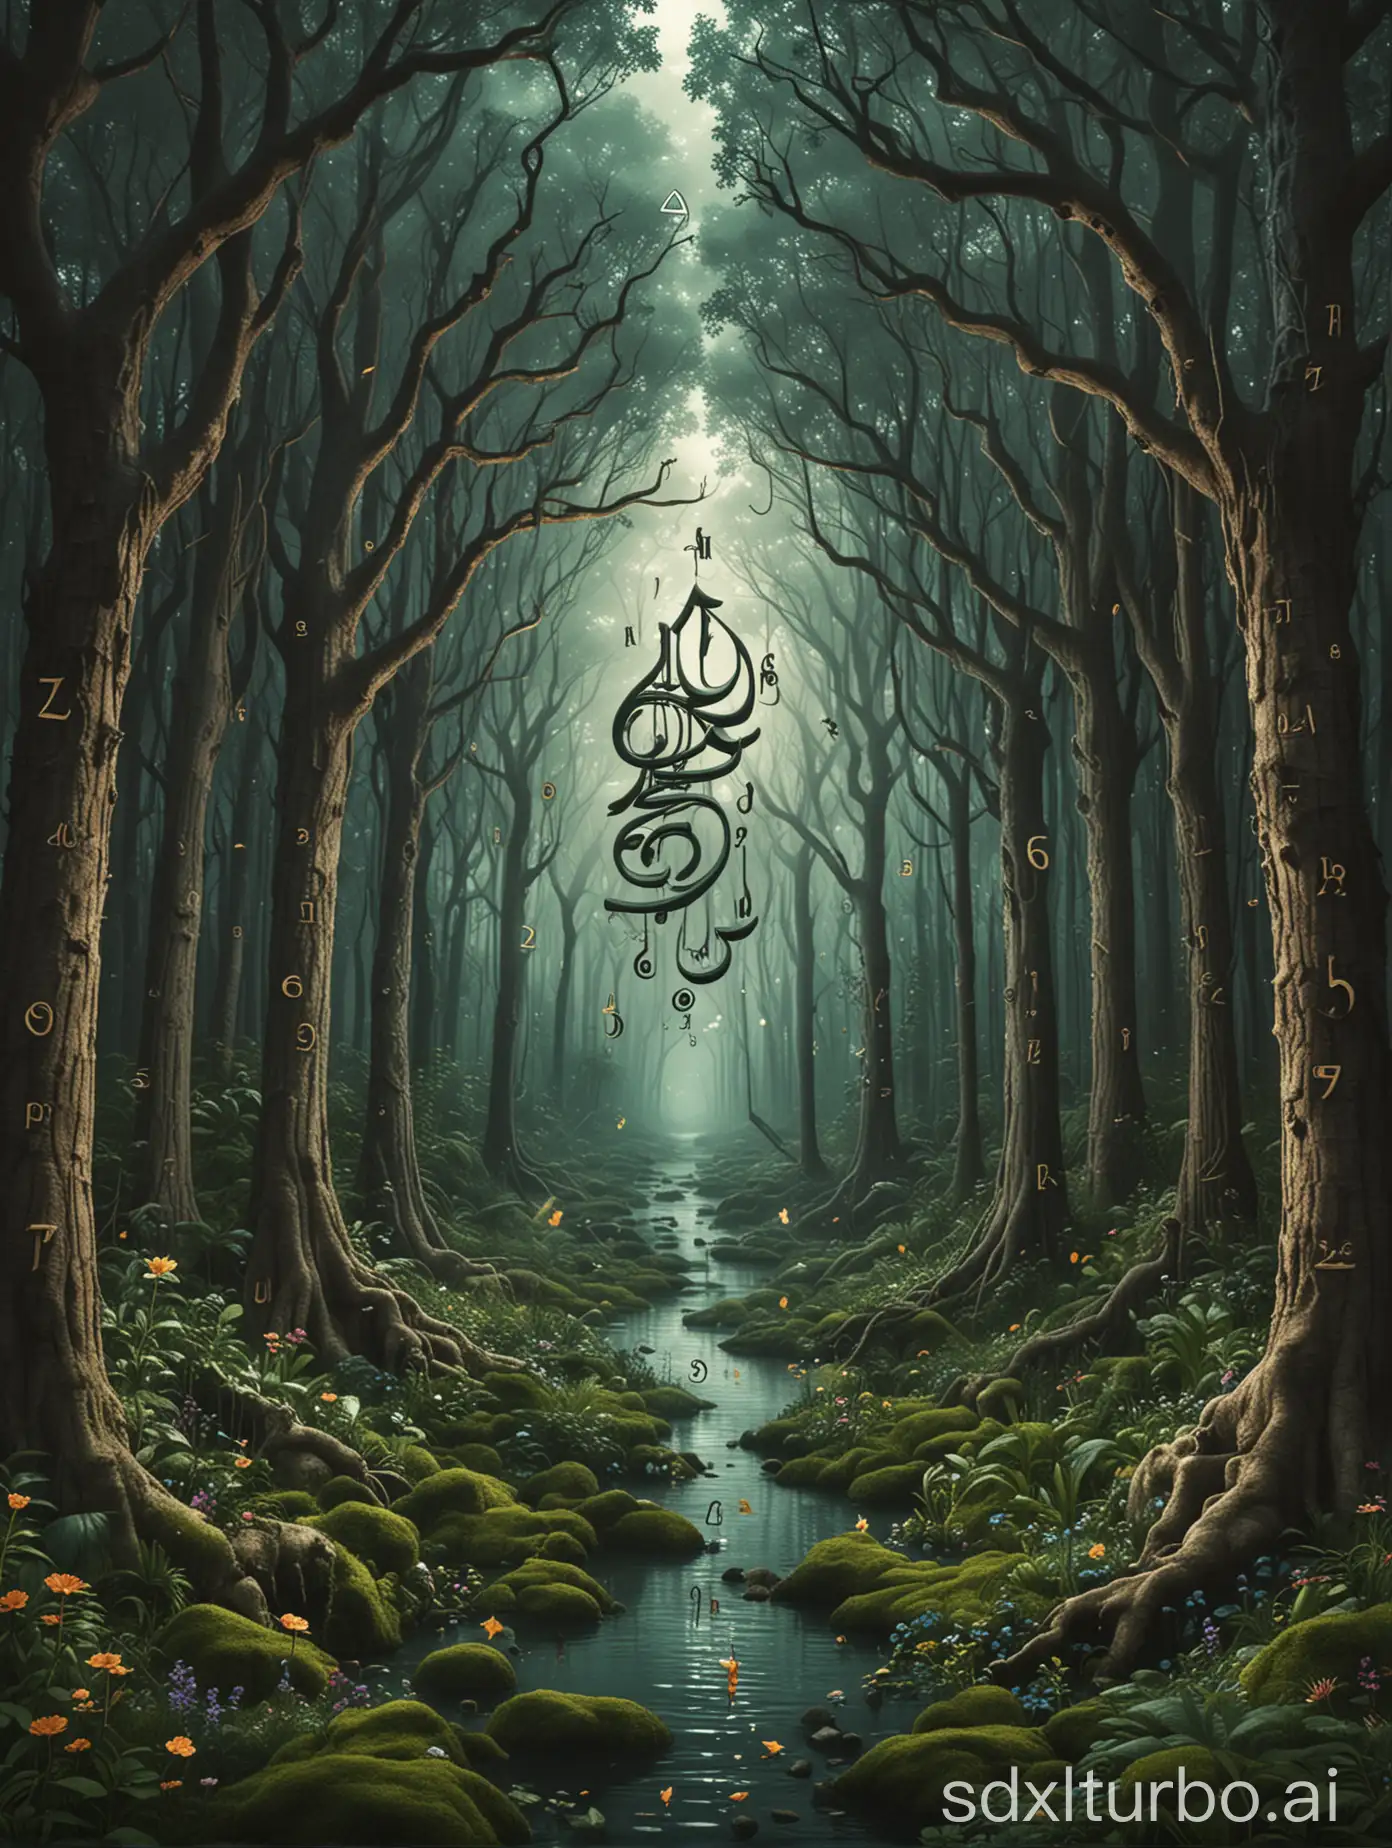 Enchanted-Forest-Music-Album-Cover-with-Arabic-Numerals